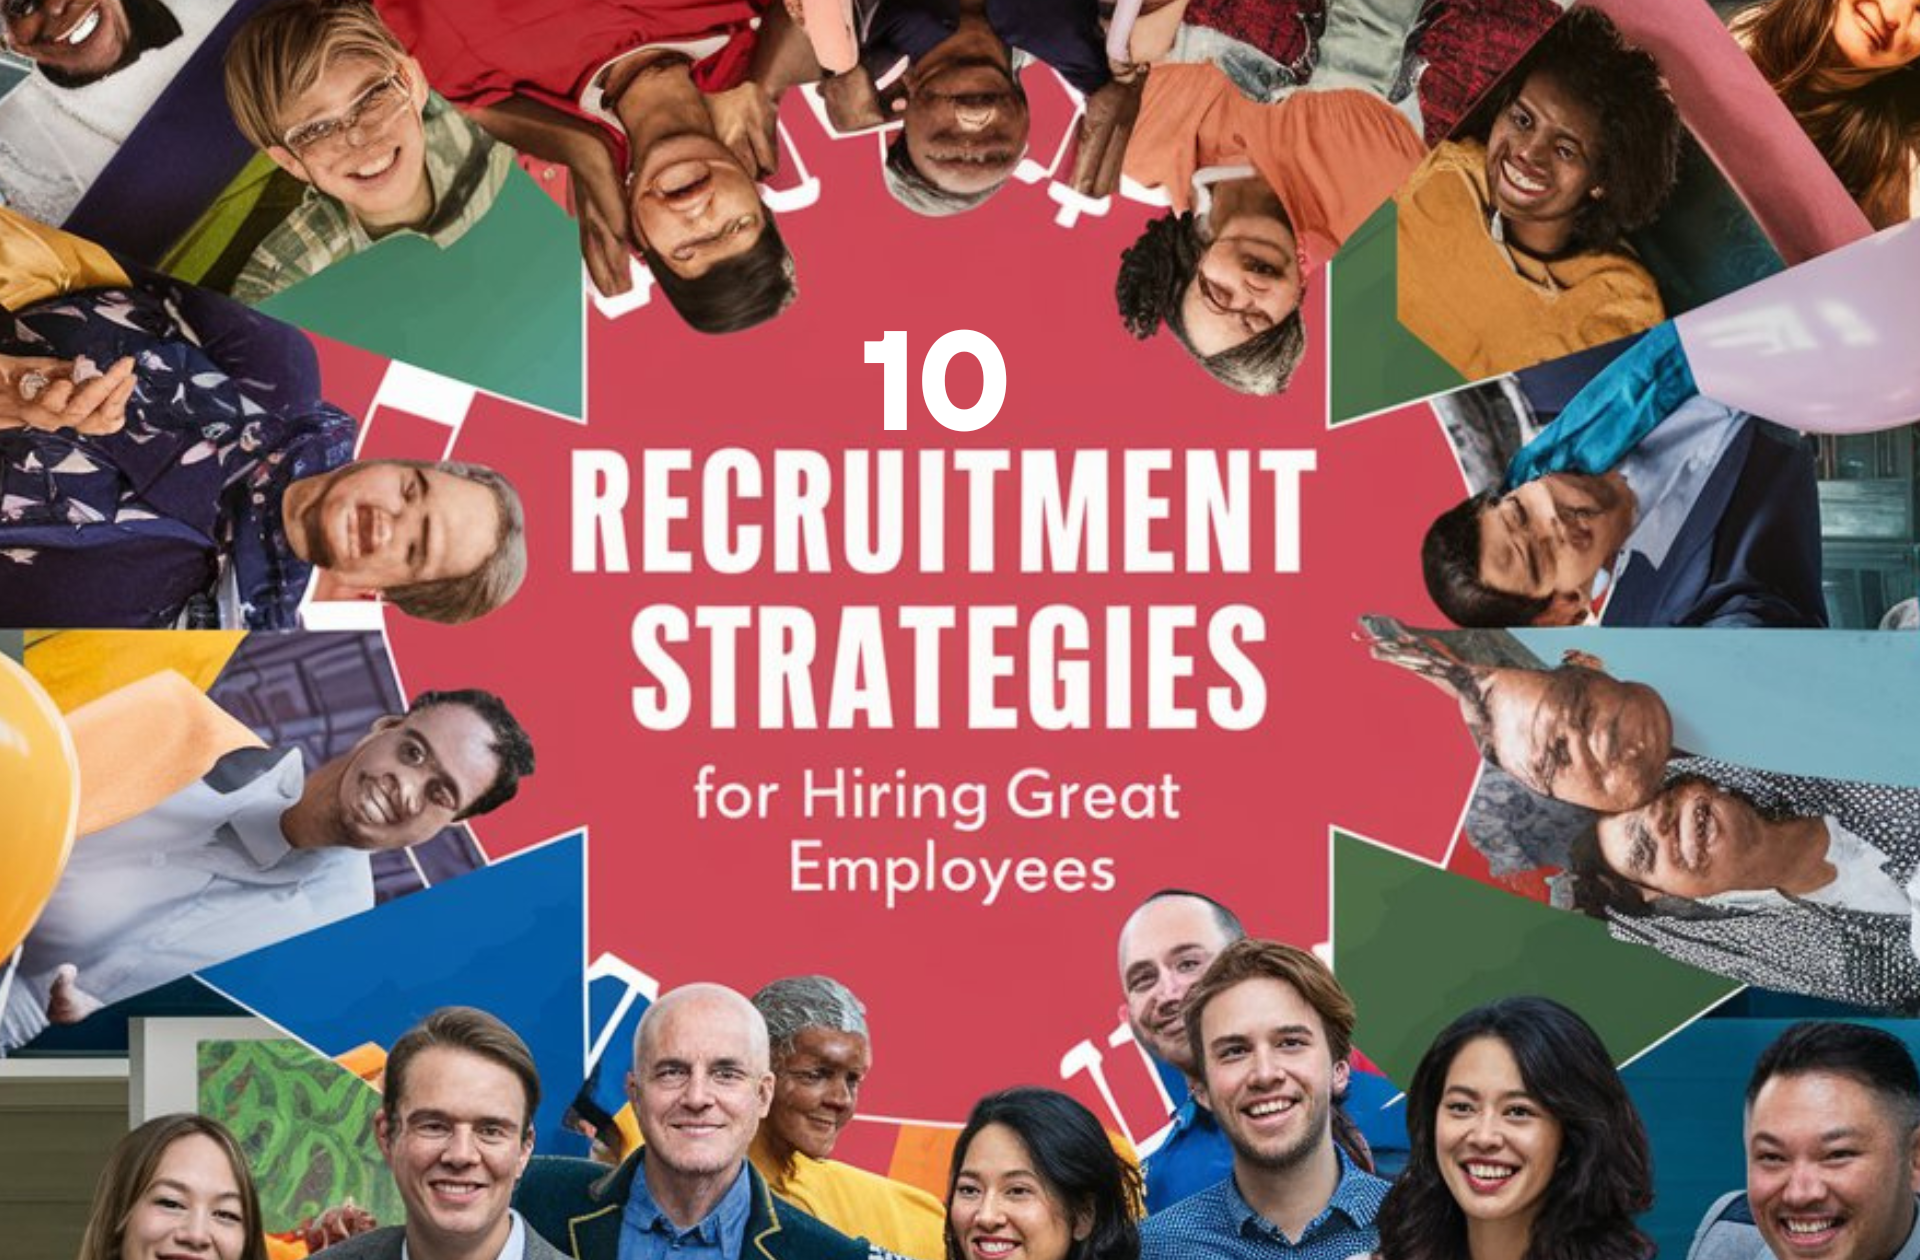 10 Recruitment Strategies for Hiring Great Employees